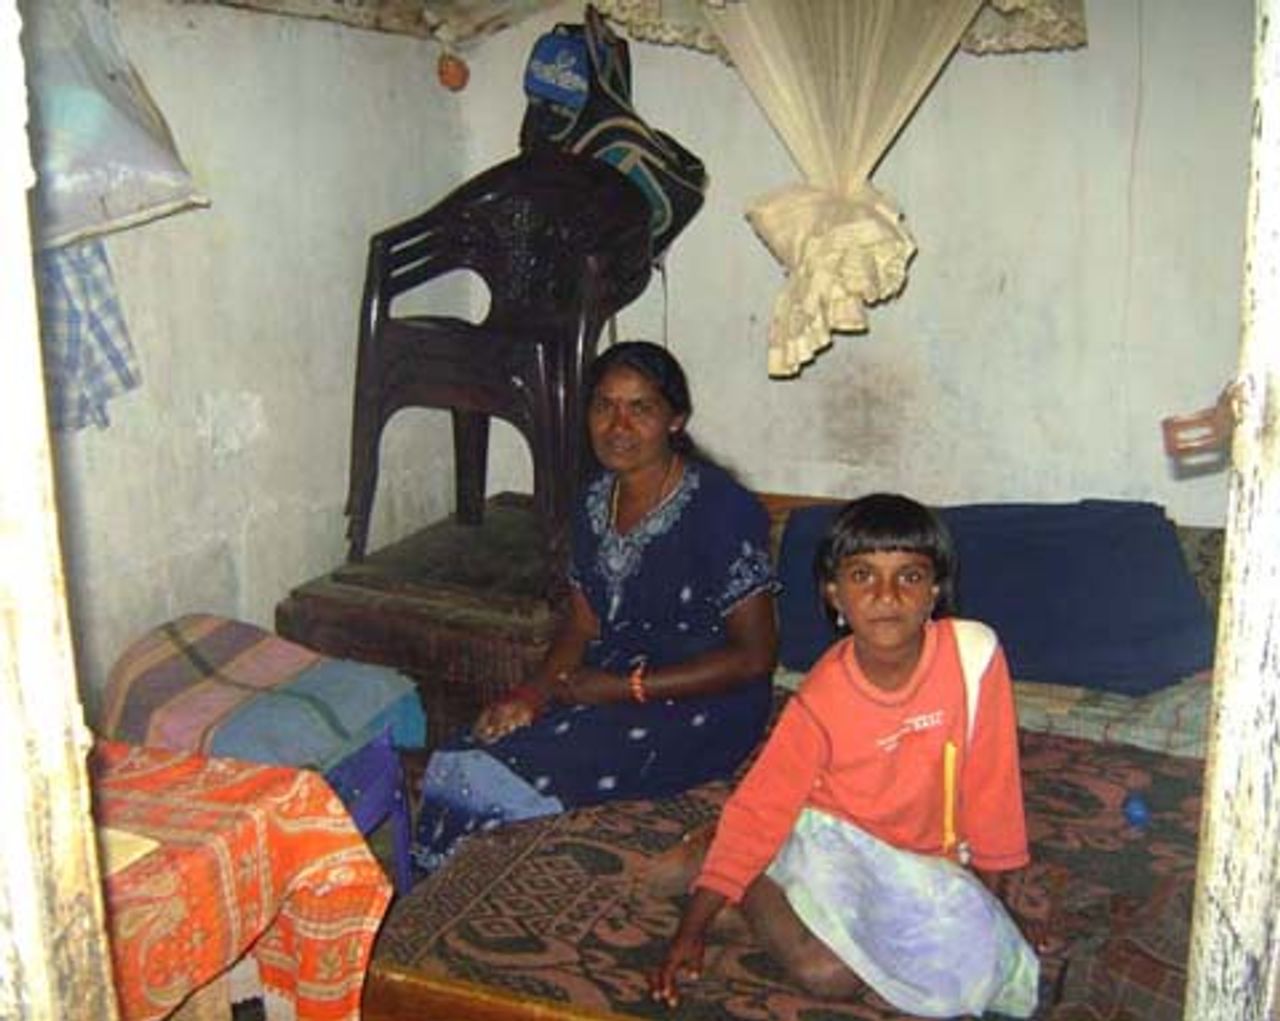 Estate worker and her daughter inside their rented room